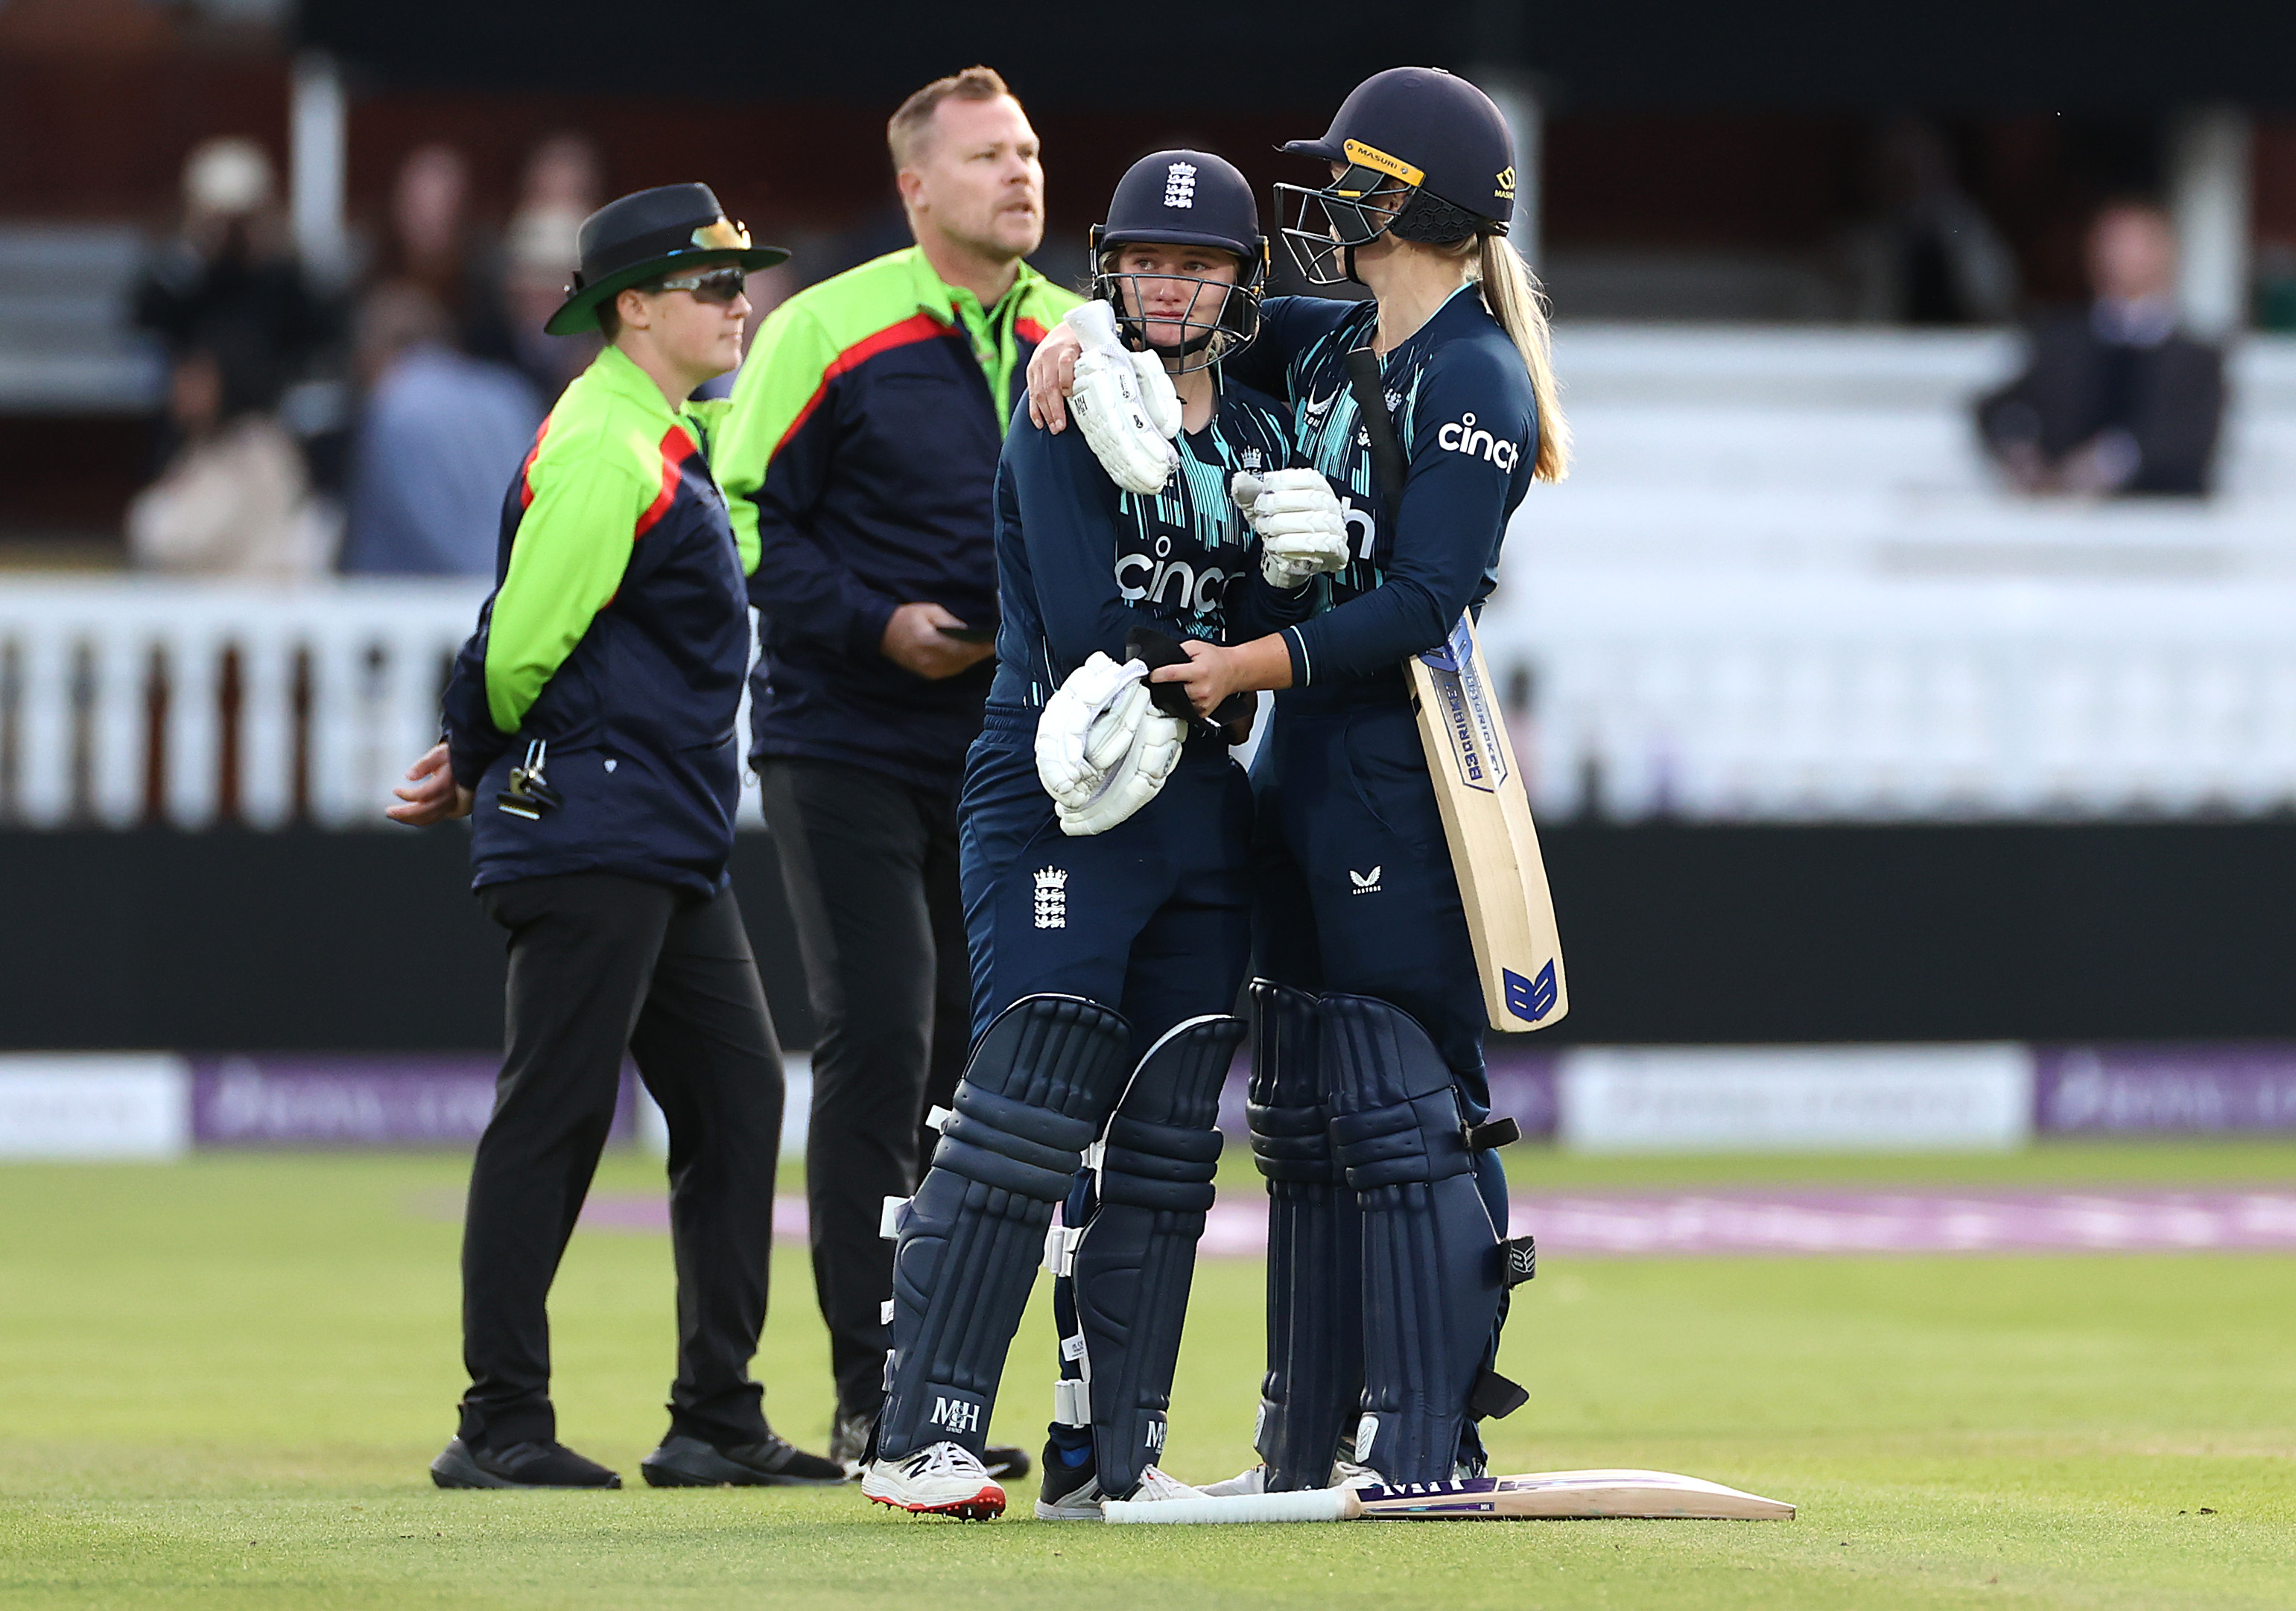 Charlie Dean of England is consoled by Freya Davies of England after Dean was run out Deepti Sharma of India to claim victory during the 3rd Royal London ODI between England Women and India Women at Lord's Cricket Ground on September 24, 2022 in London, England. (Photo by Ryan Pierse/Getty Images)